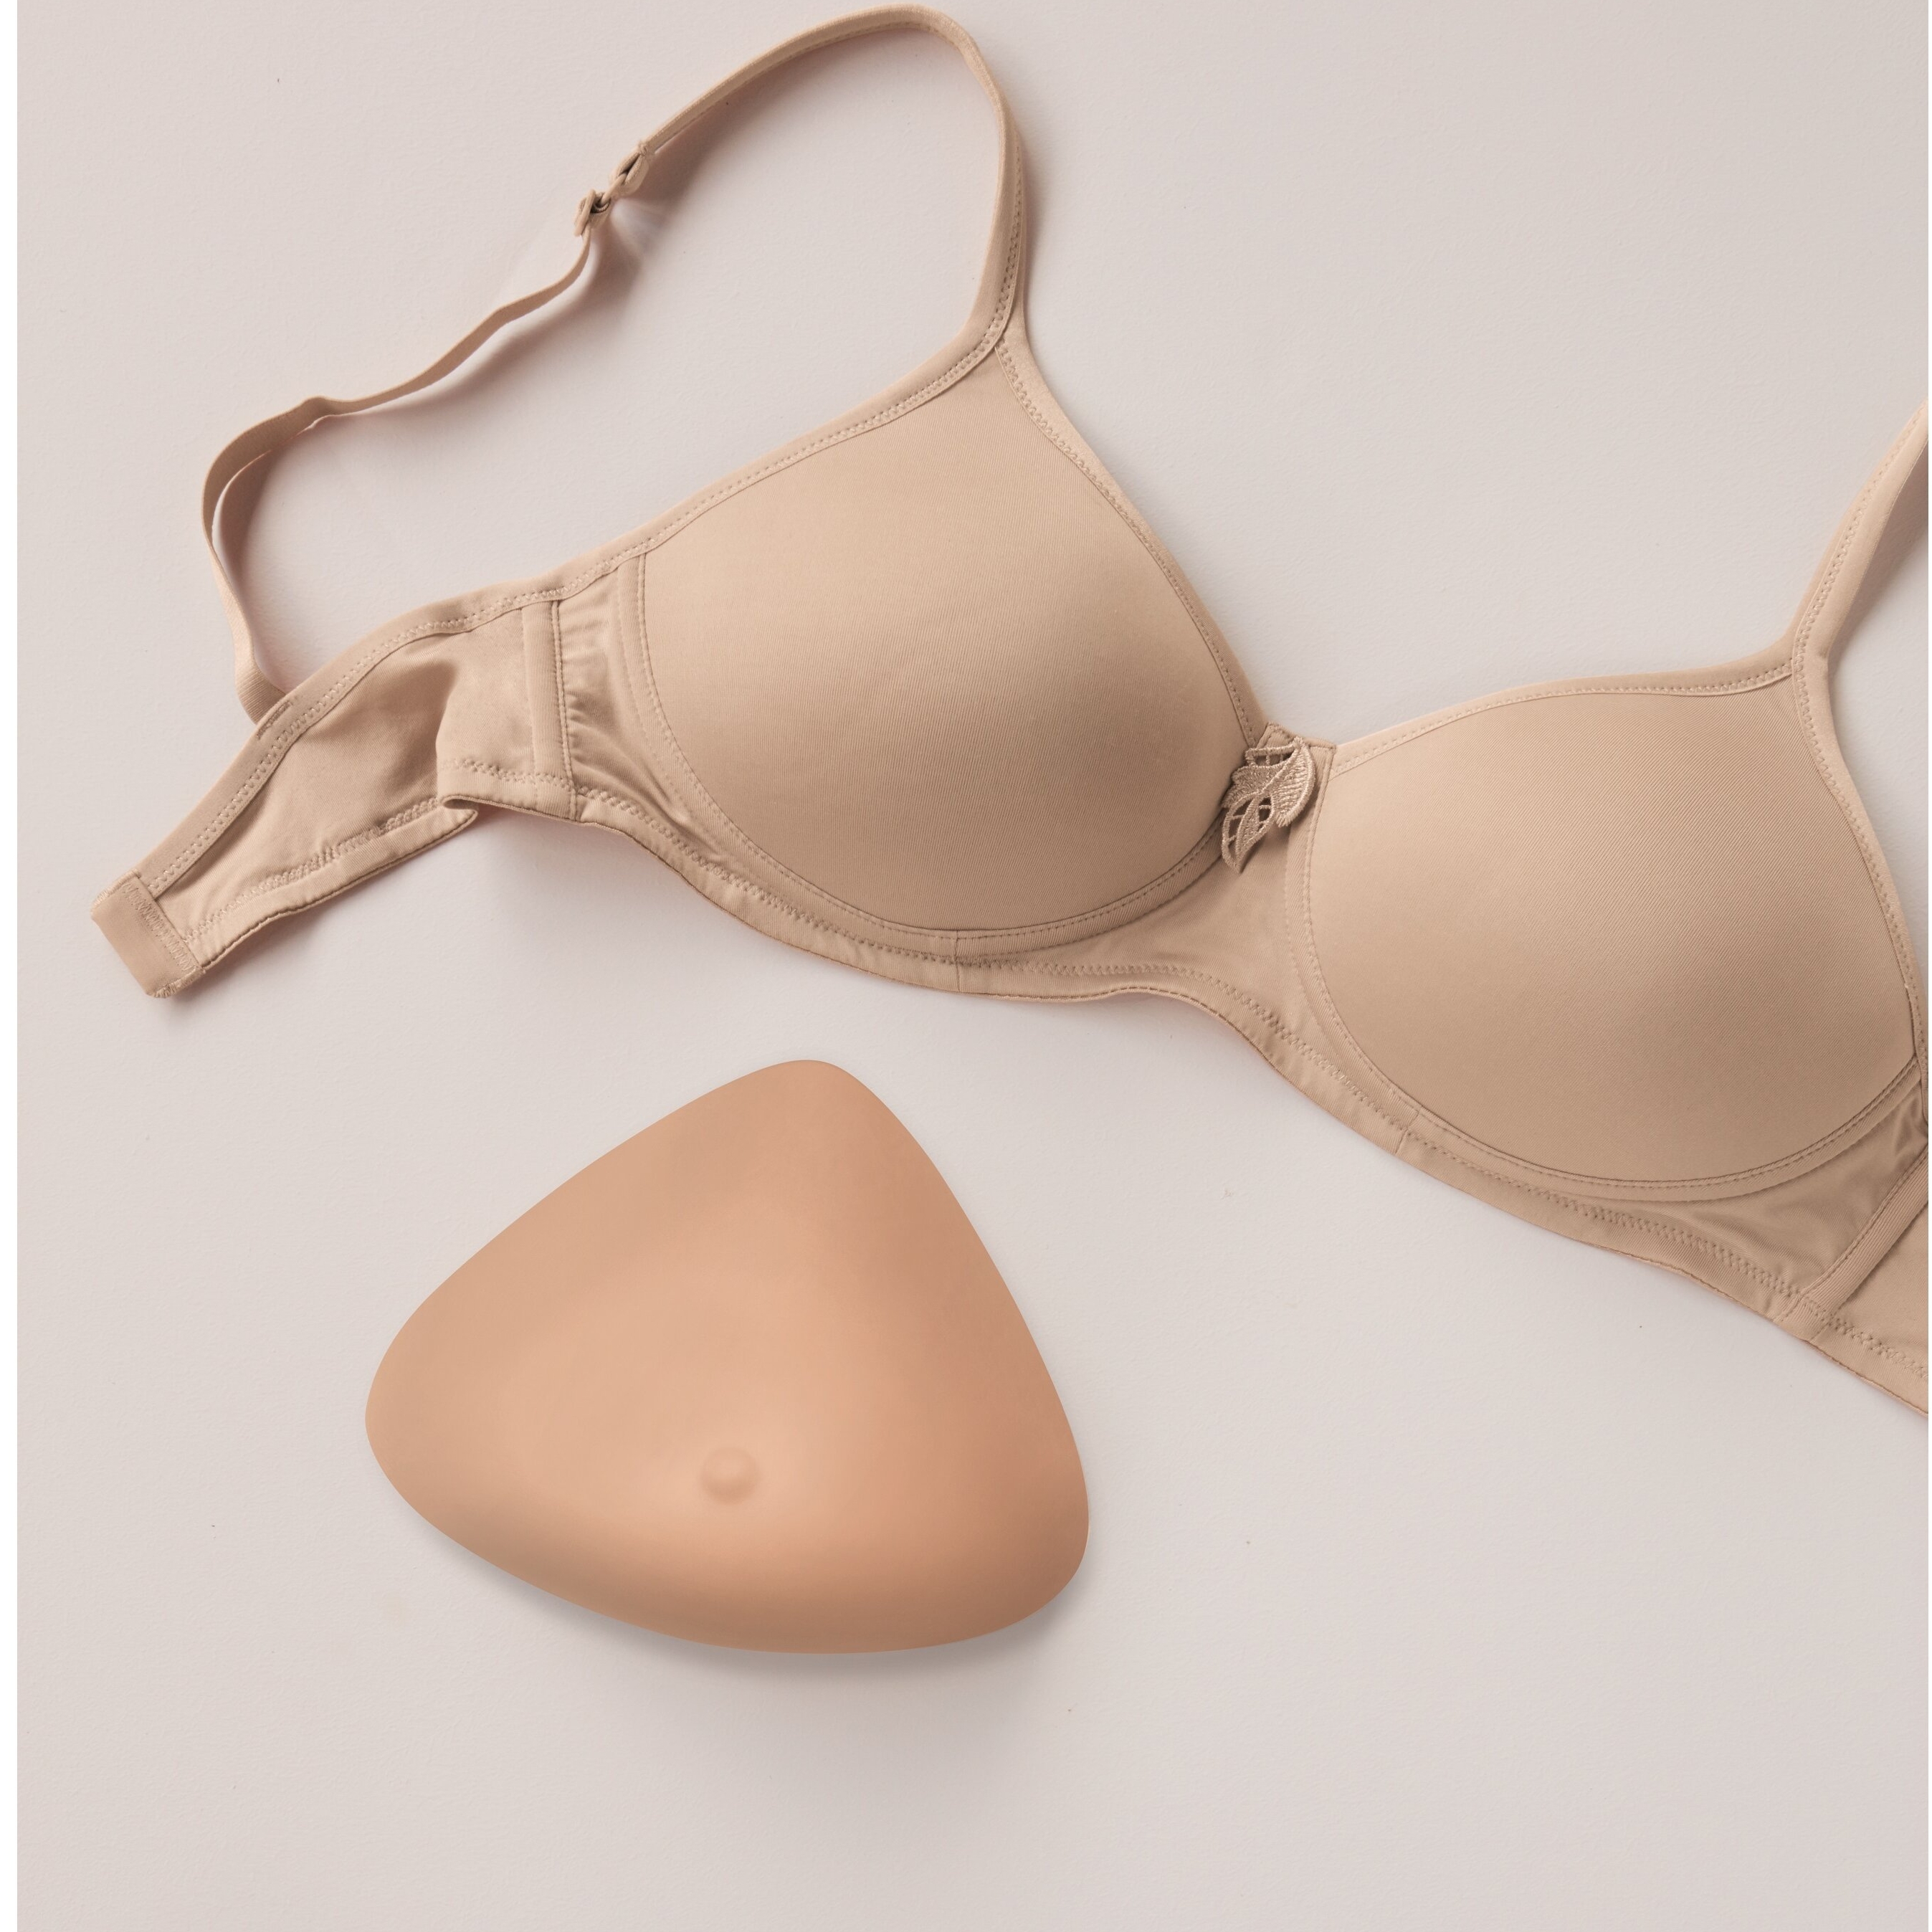 Breast Forms, Mastectomy Bras